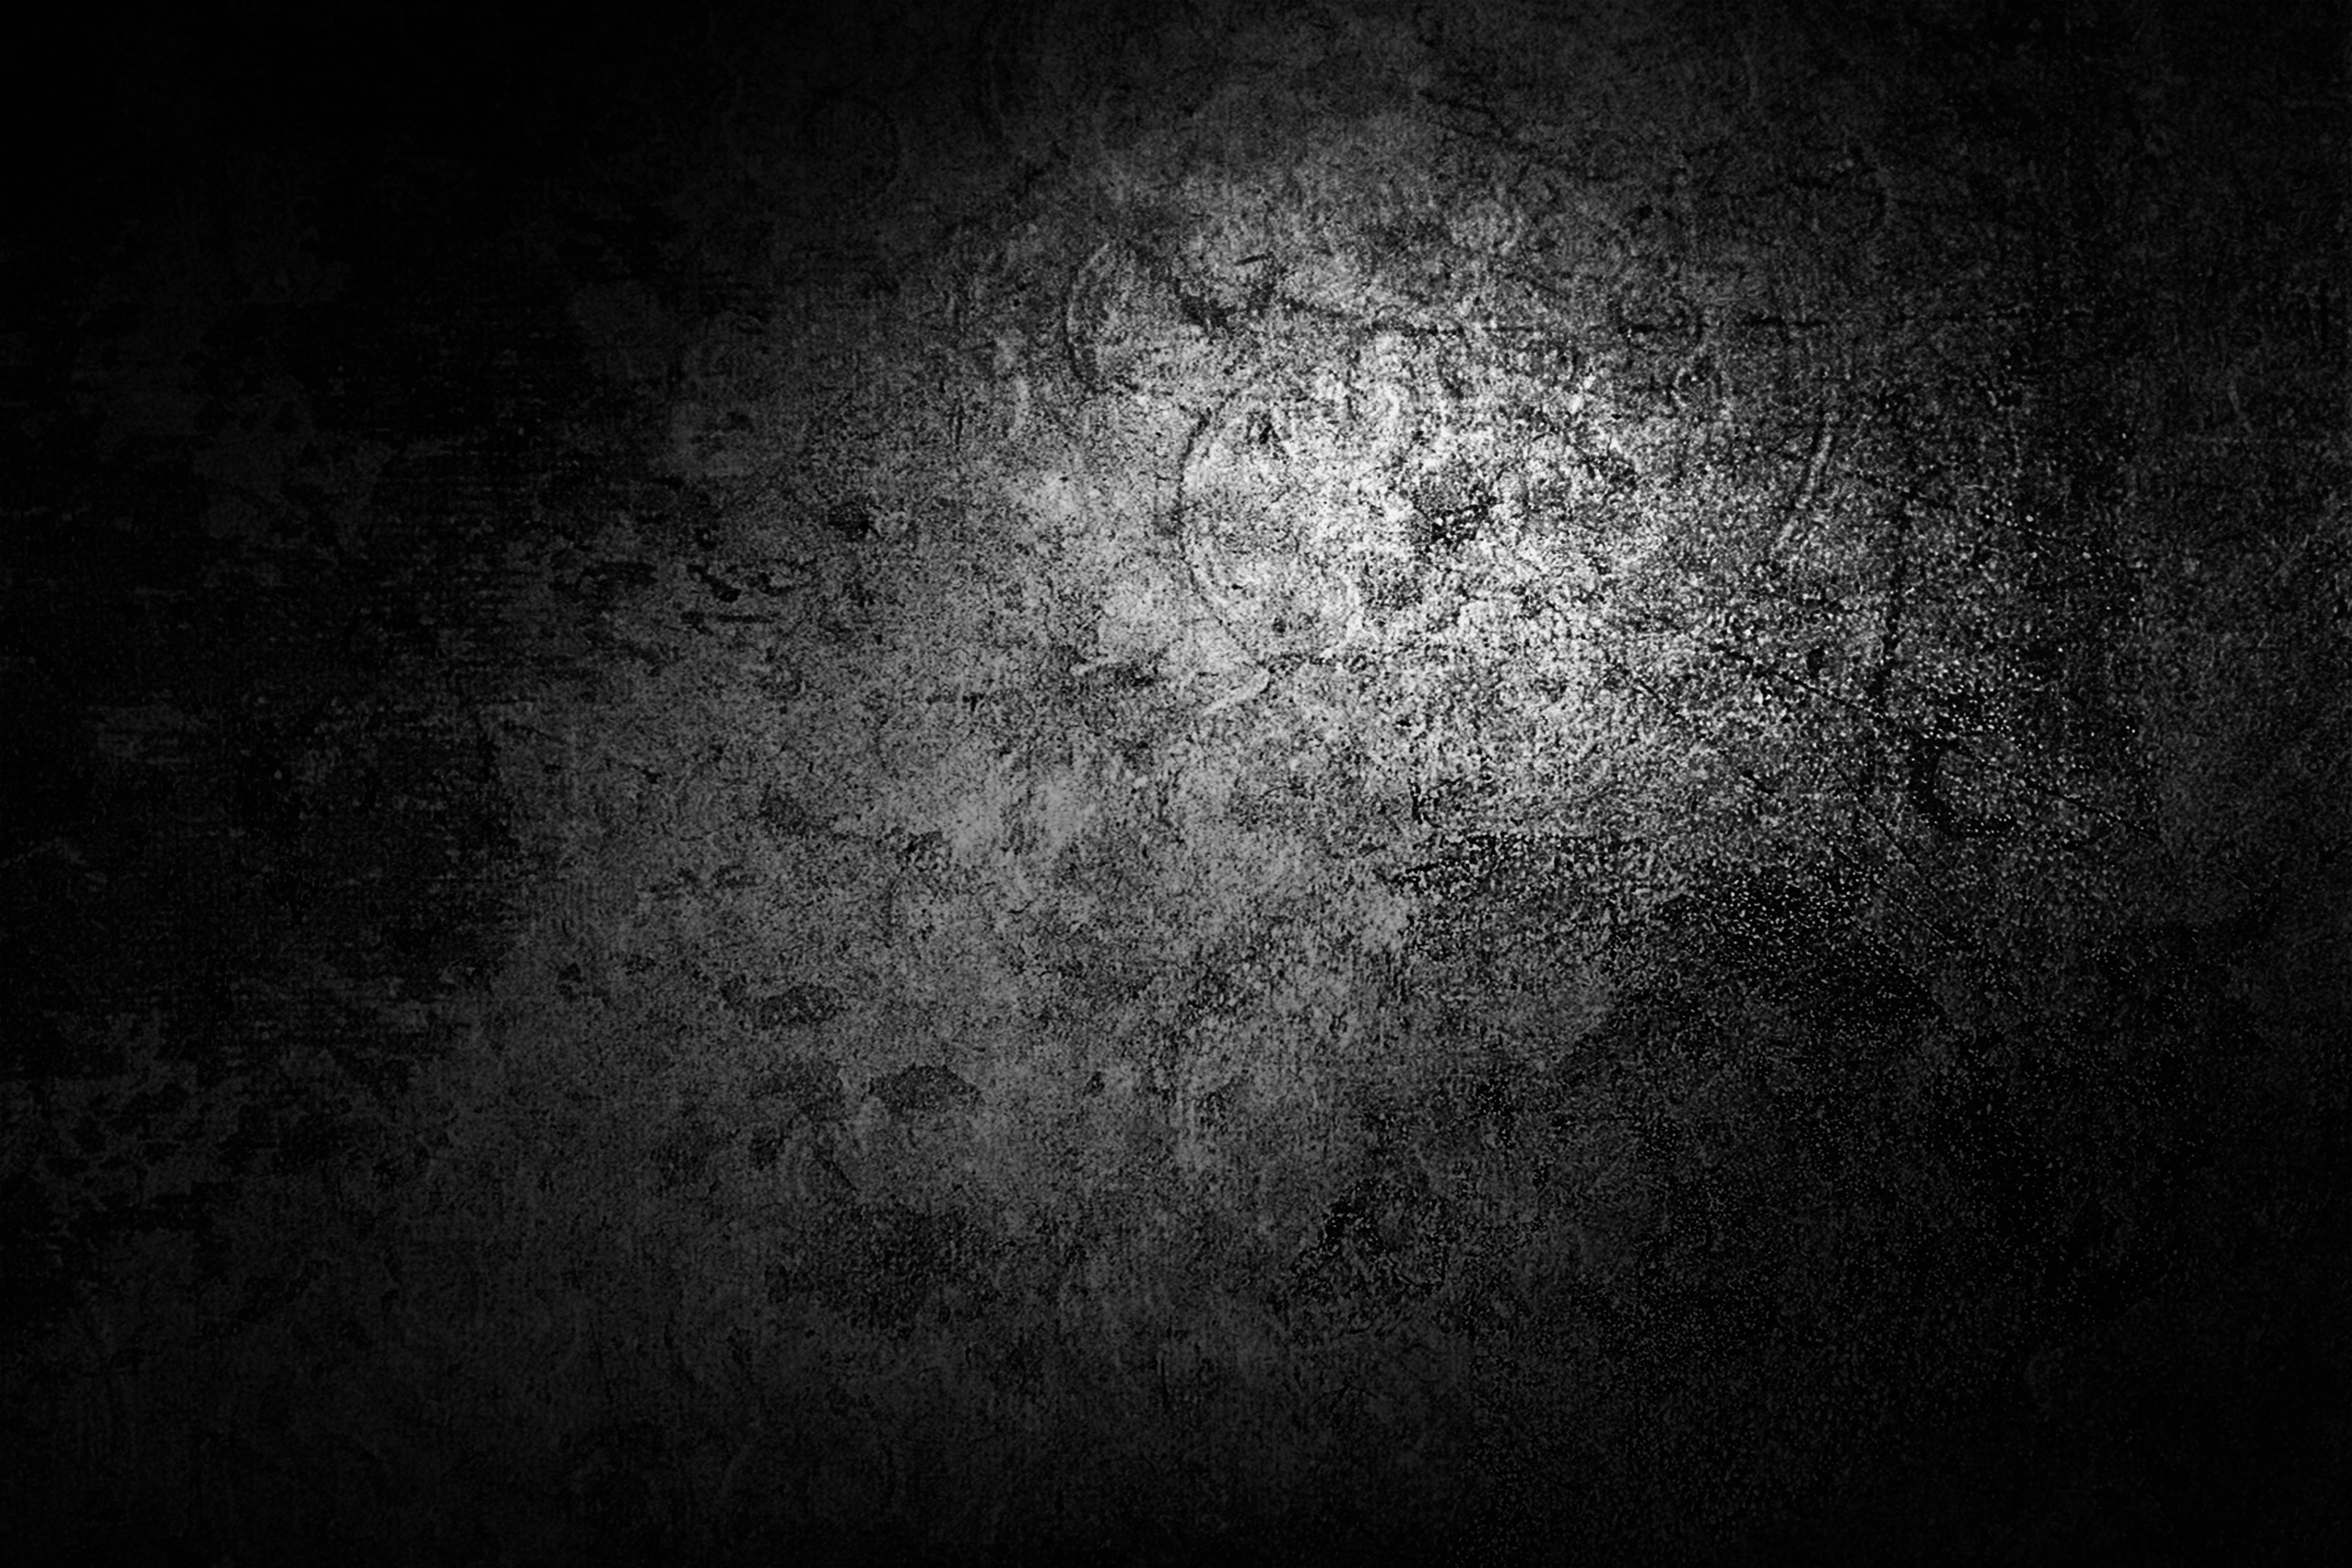 Grunge Textures Taken From Other Image Converted To Black And White